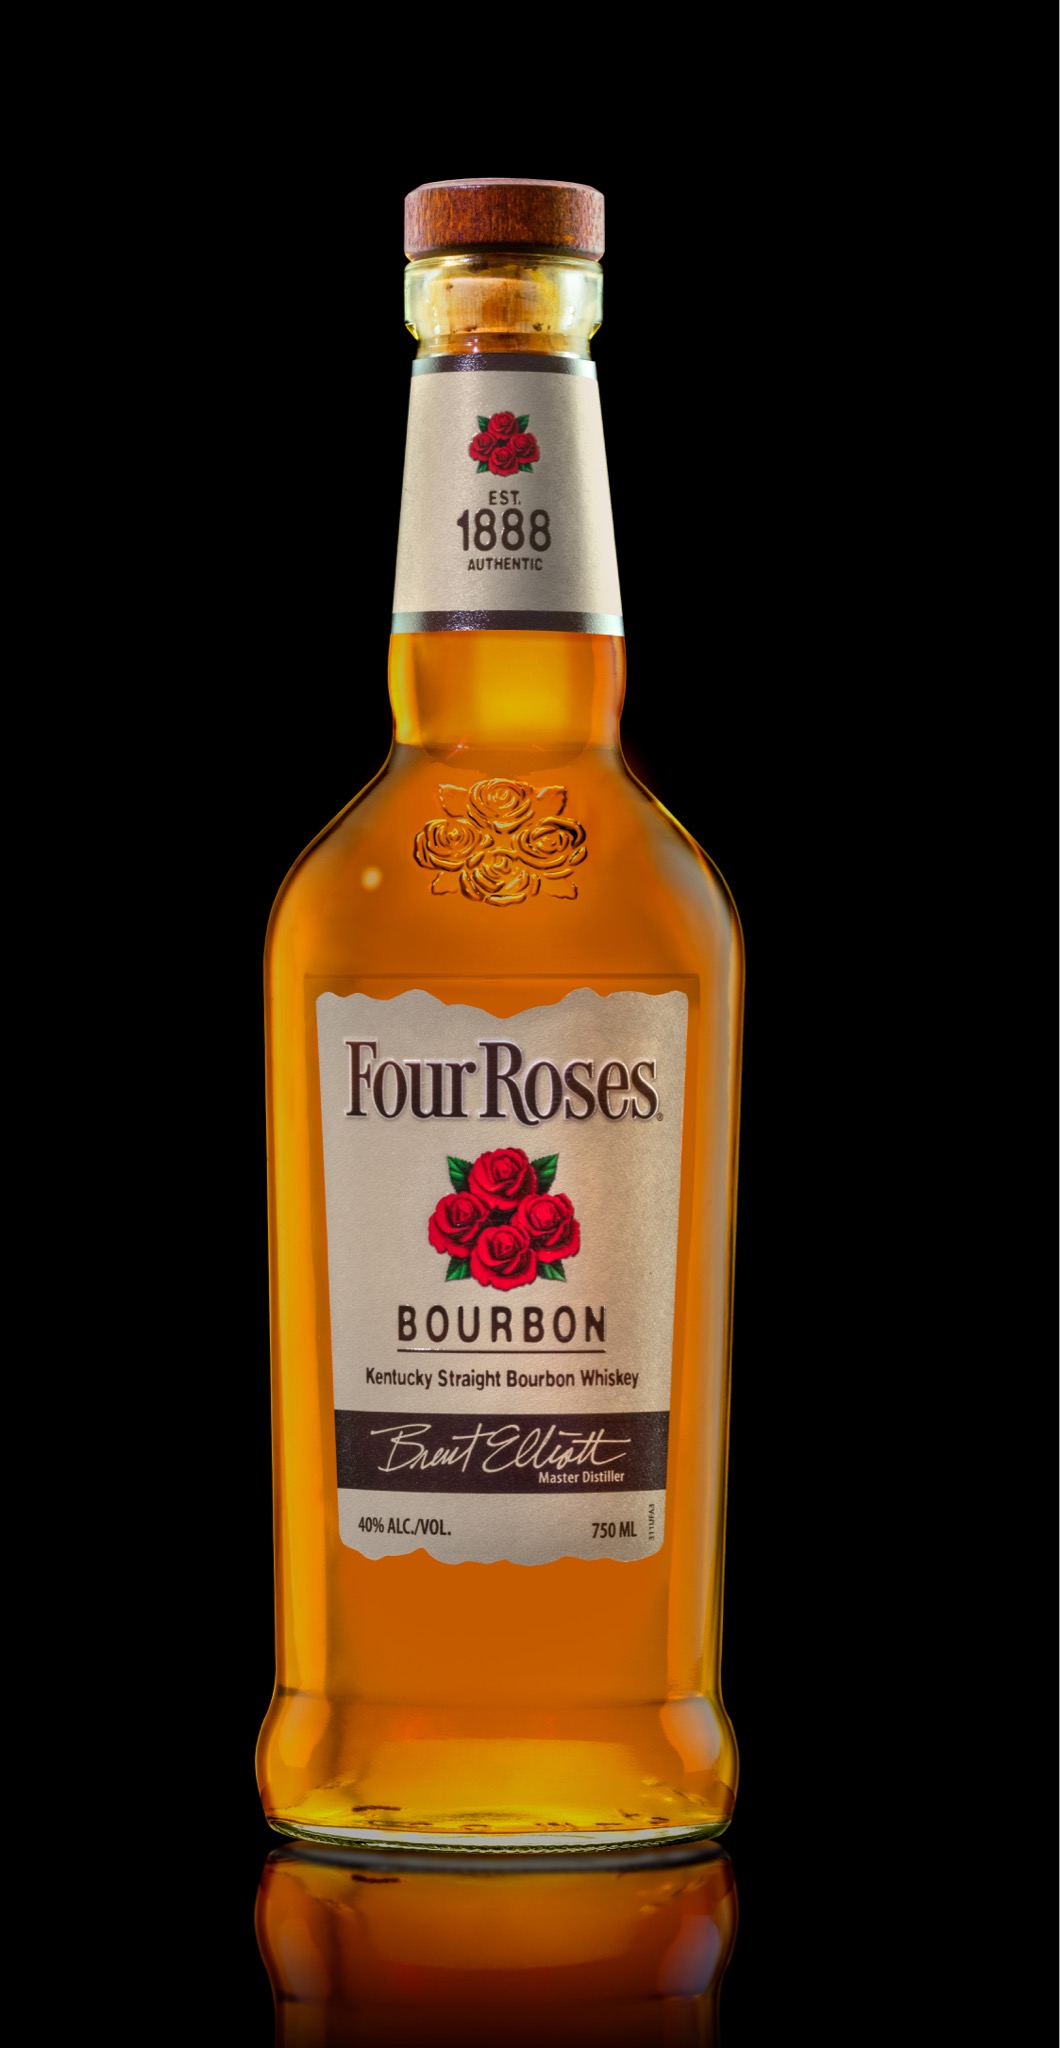 Four Roses Bourbon Gets New Look The Bourbon Review